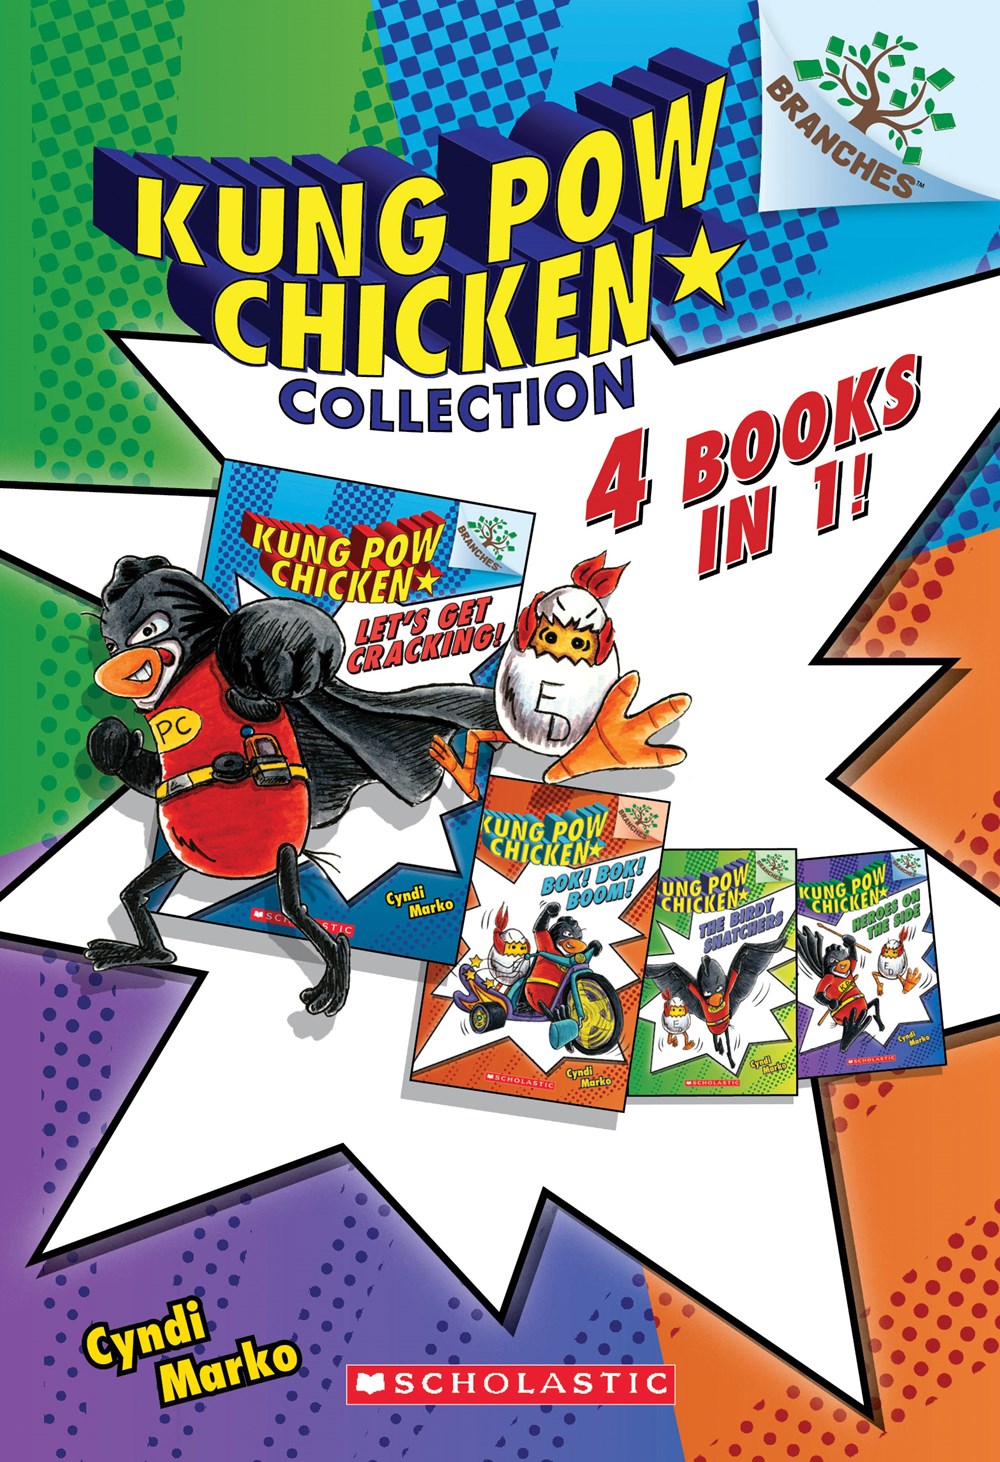 Kung Pow Chicken Collection!